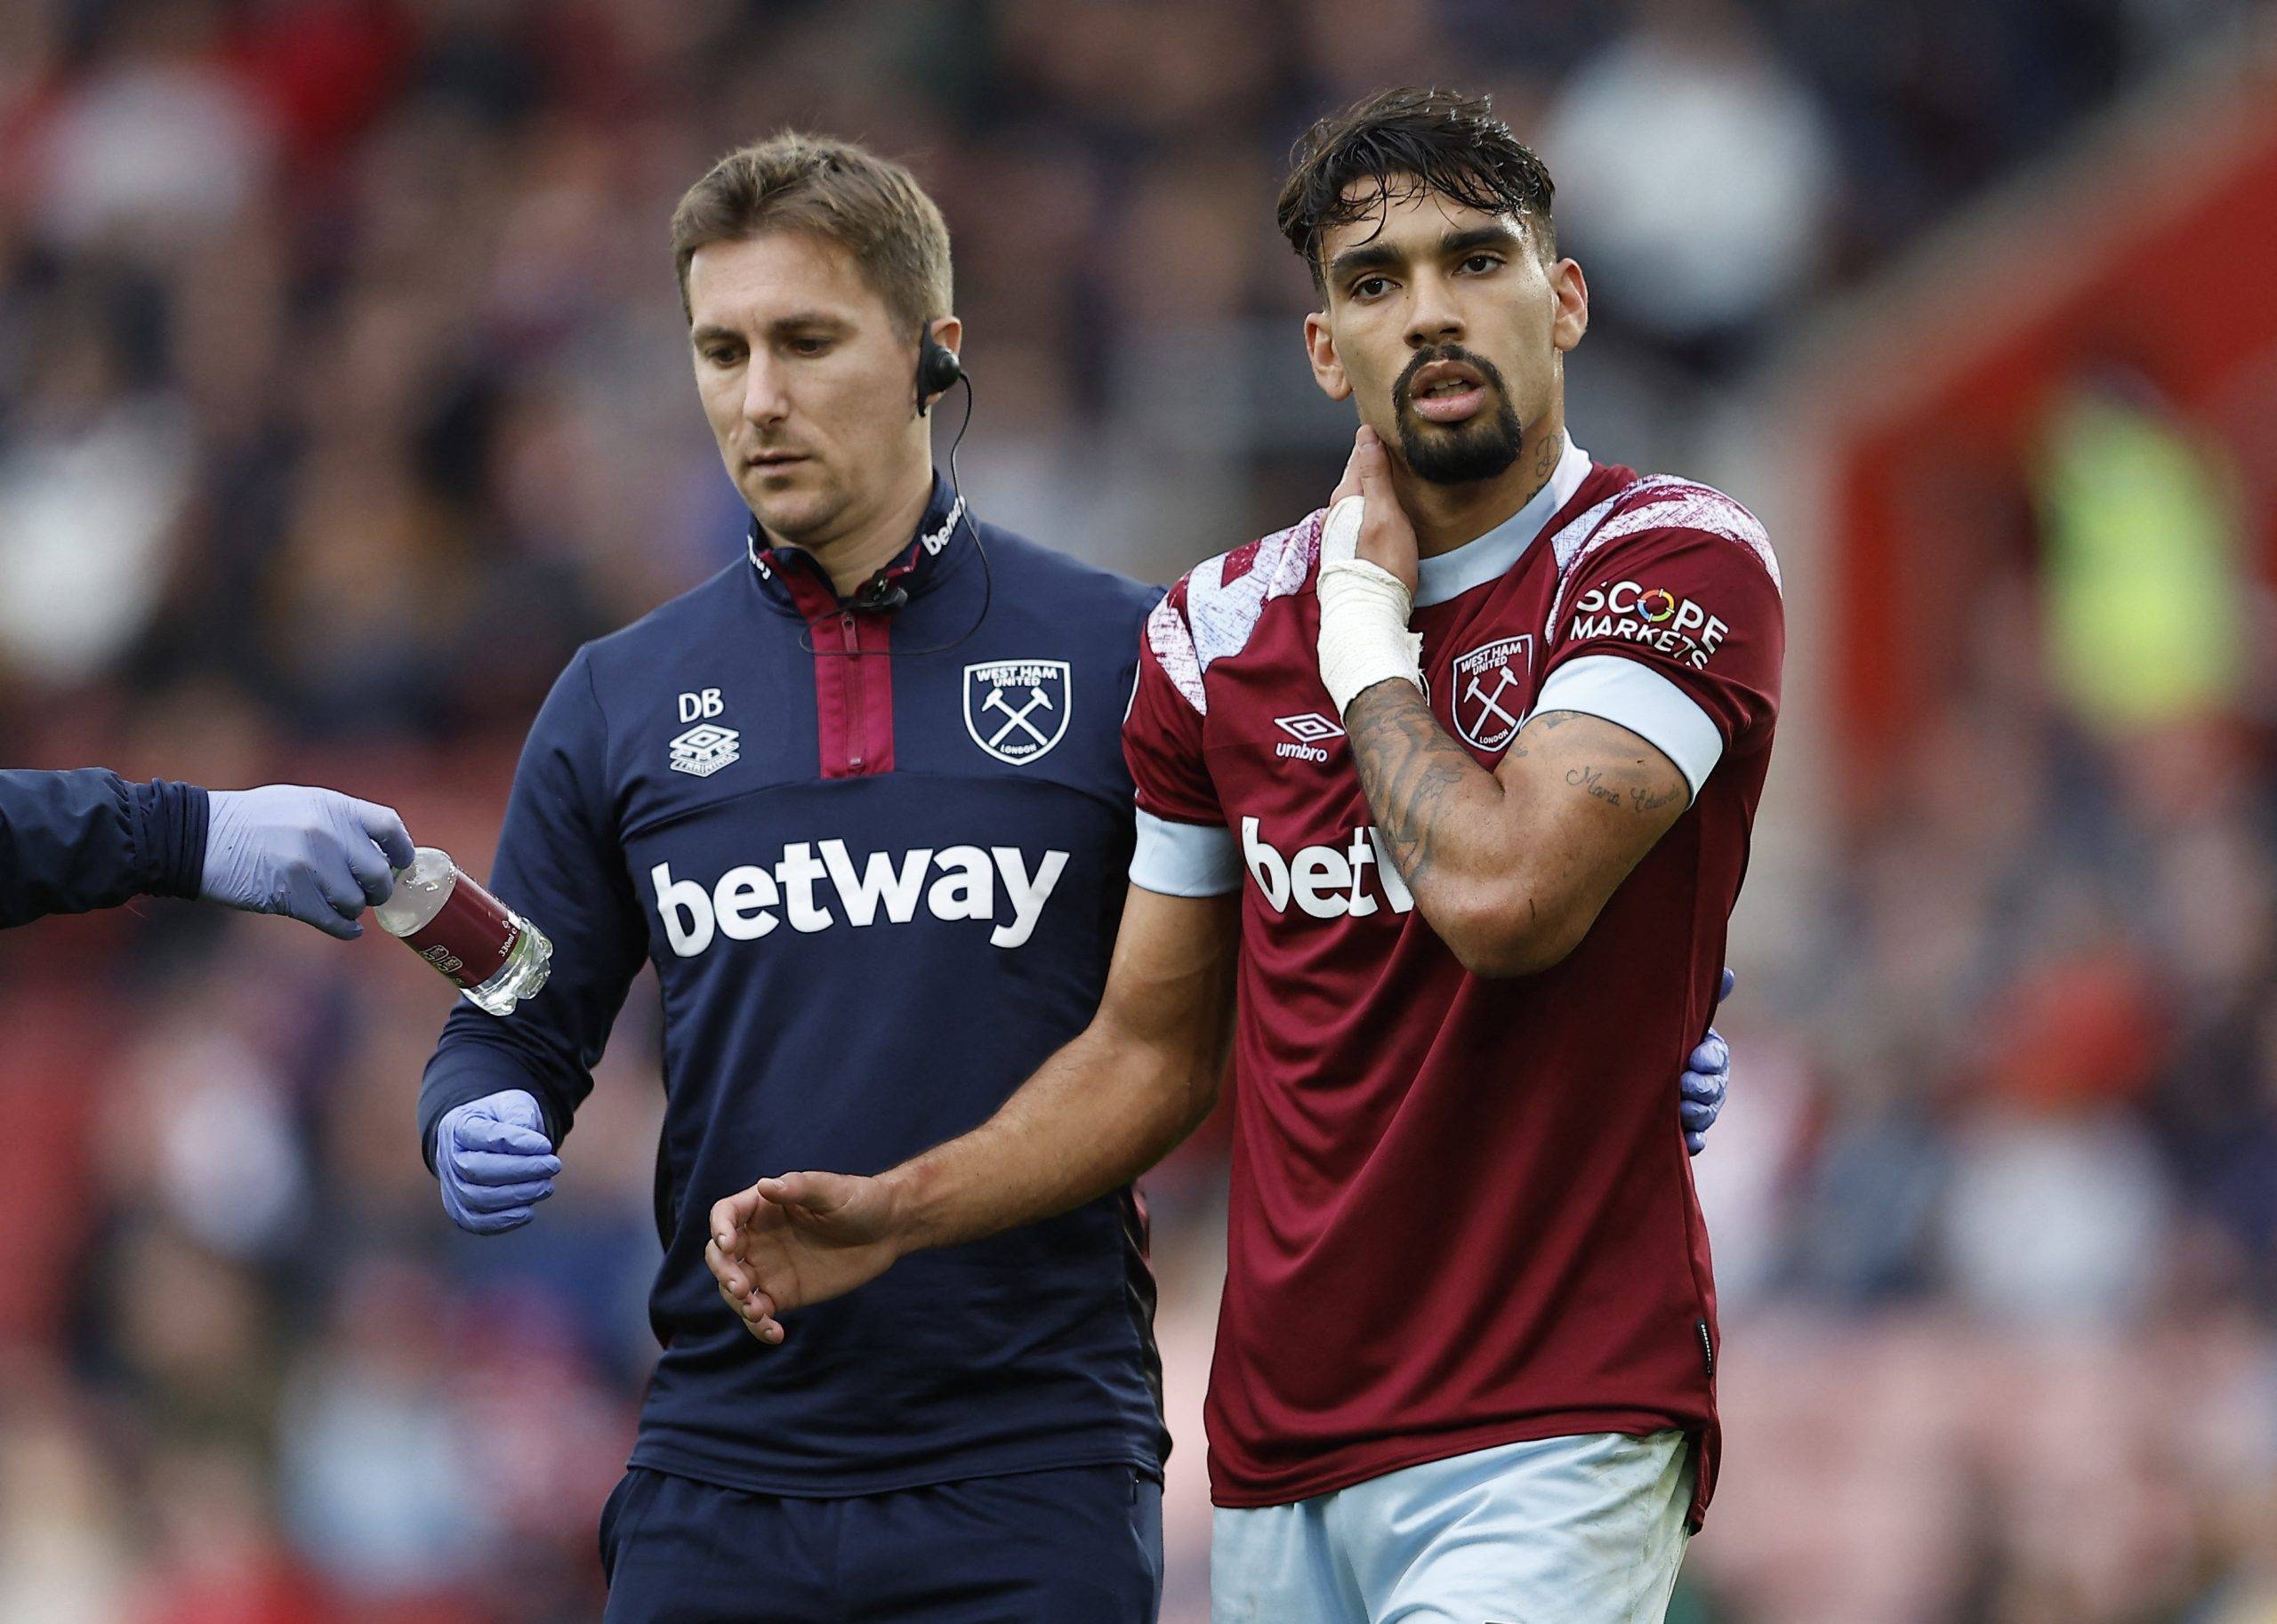 West Ham: Lucas Paqueta 'available' for the World Cup - Follow up